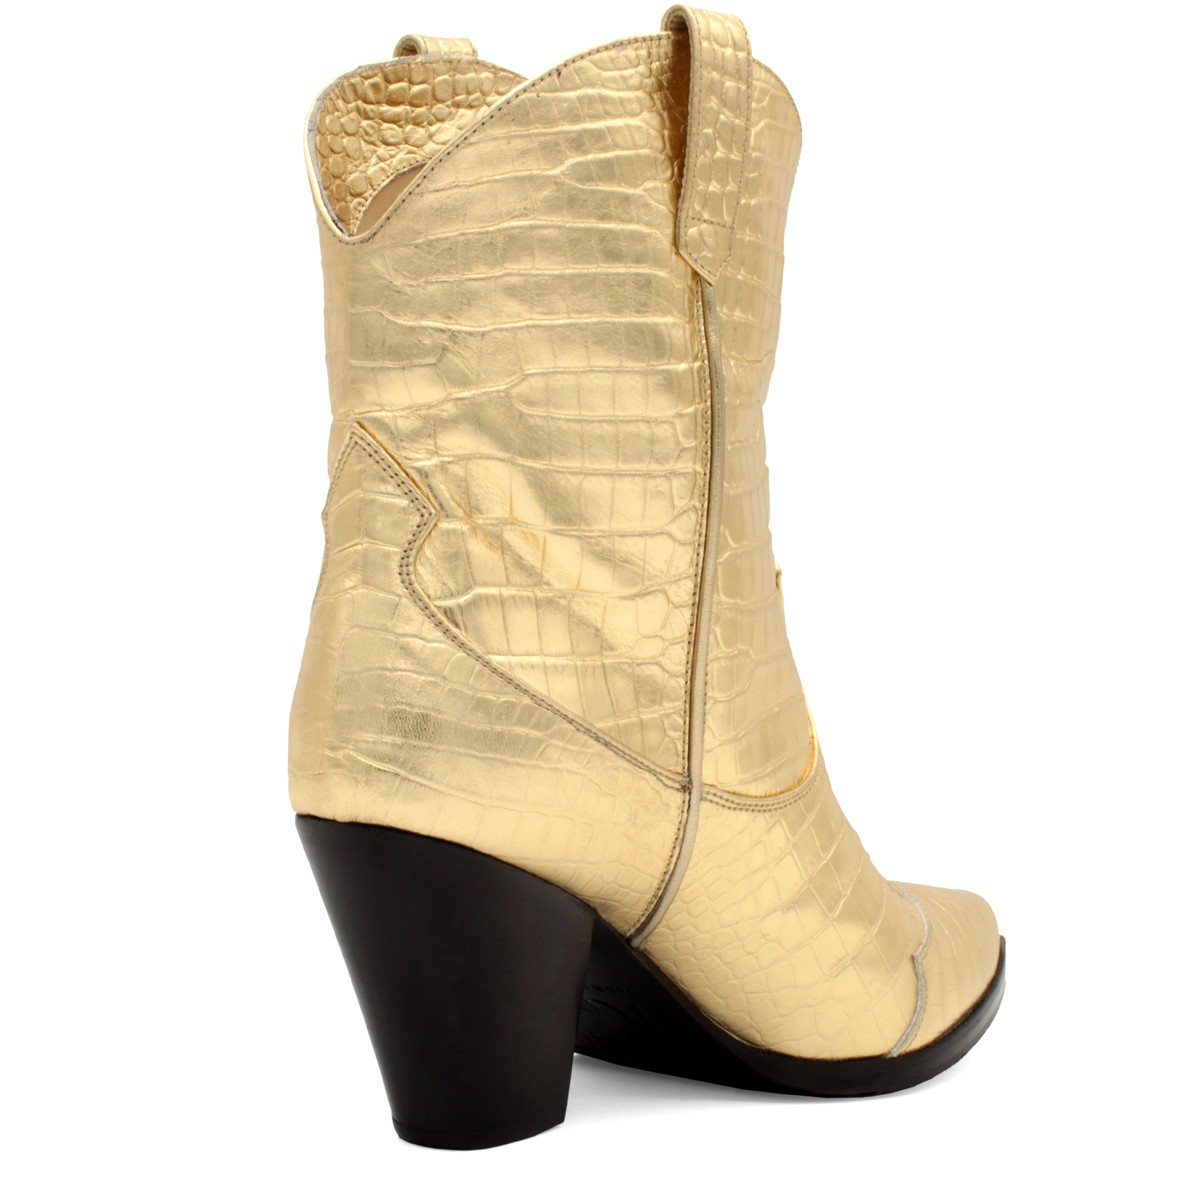 GOLDEN CROCO COWBOY-STYLE ANKLE BOOTS